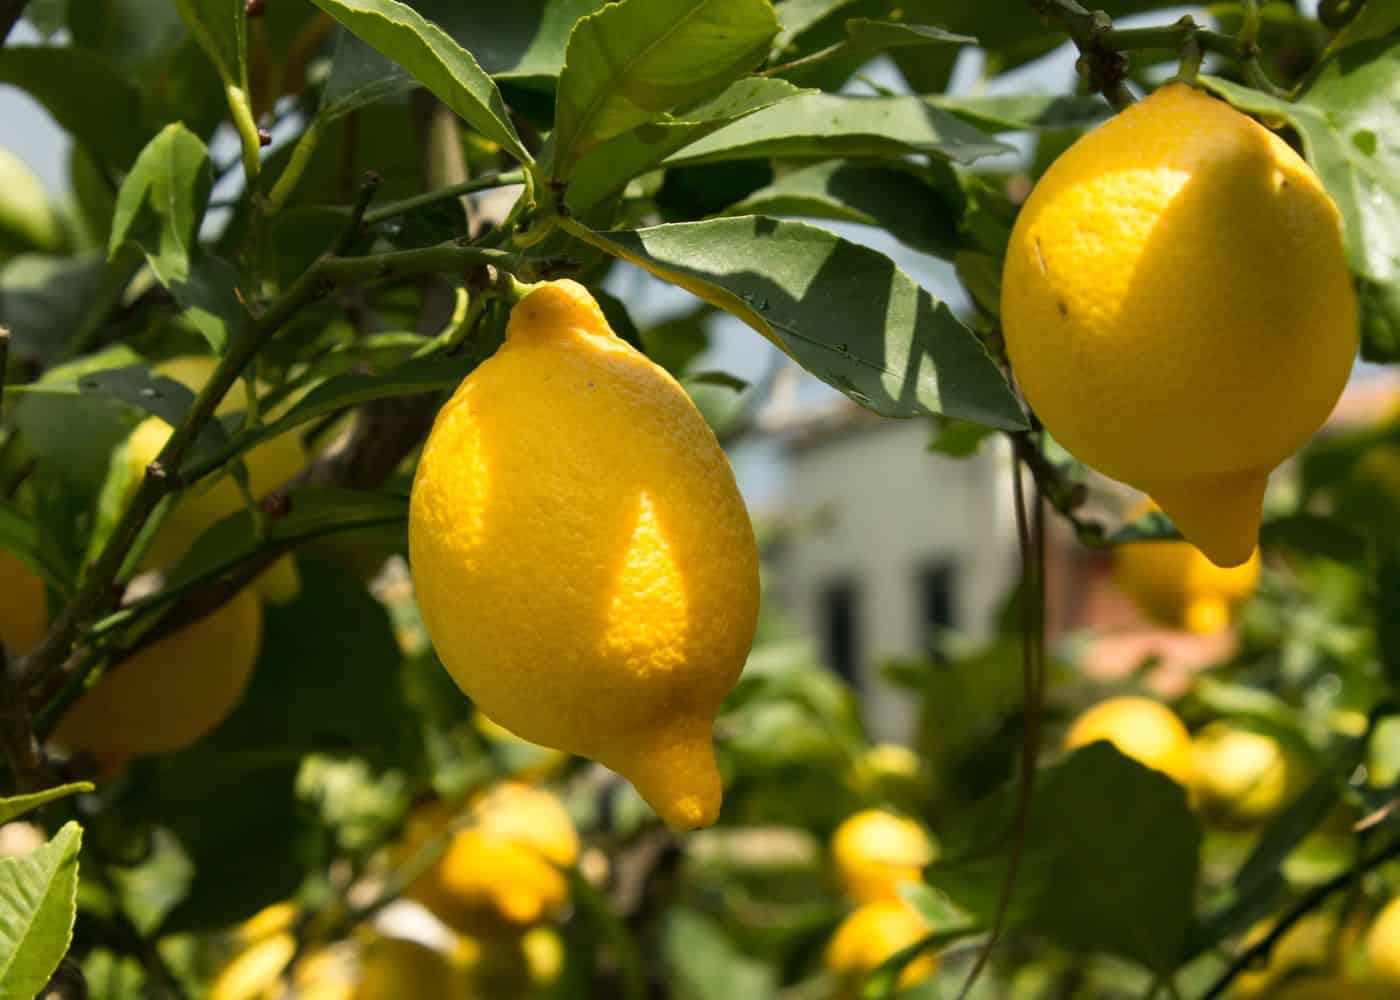 Growing your own lemons at home